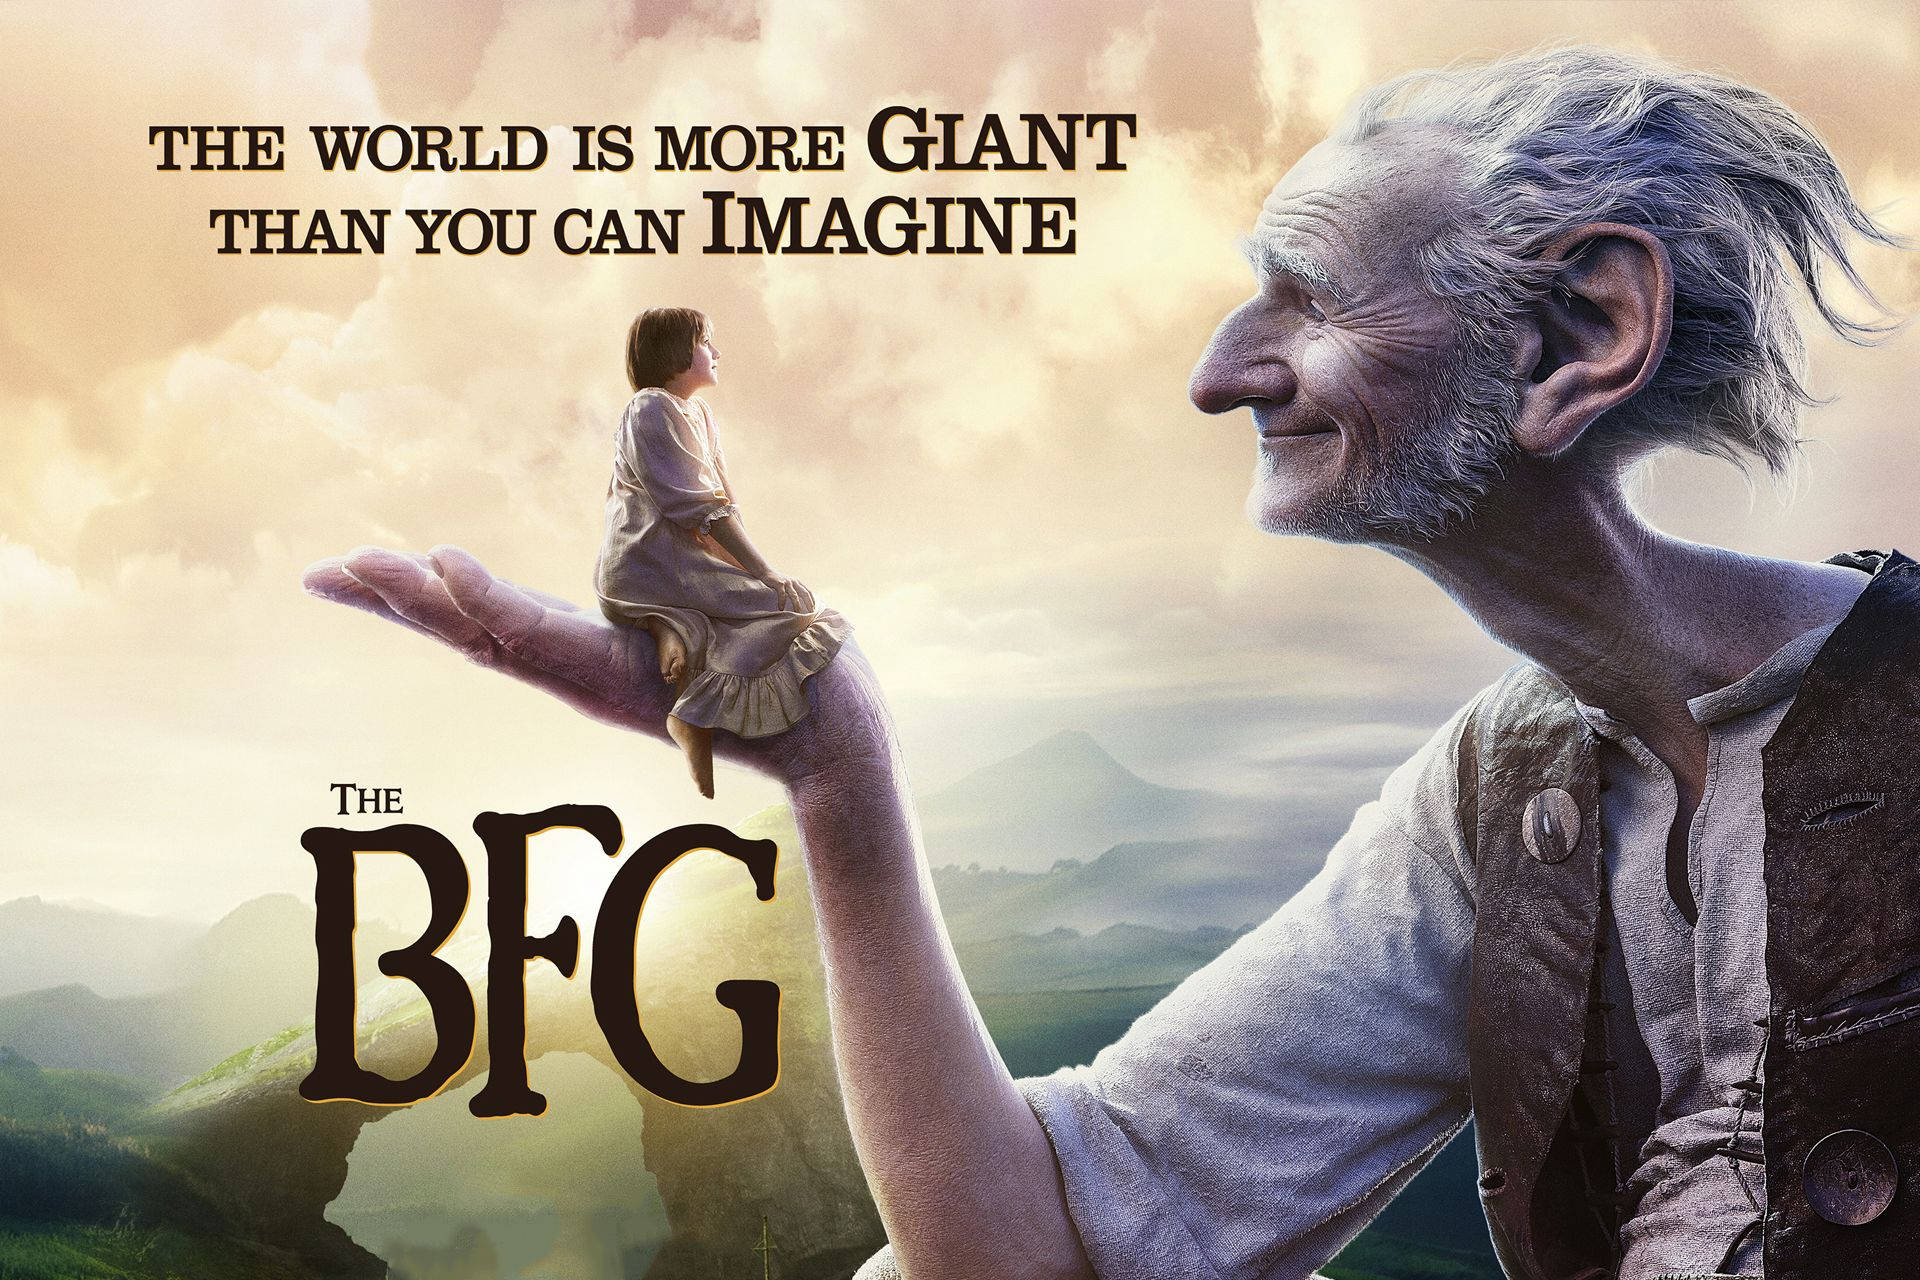 The Bfg Quote Background